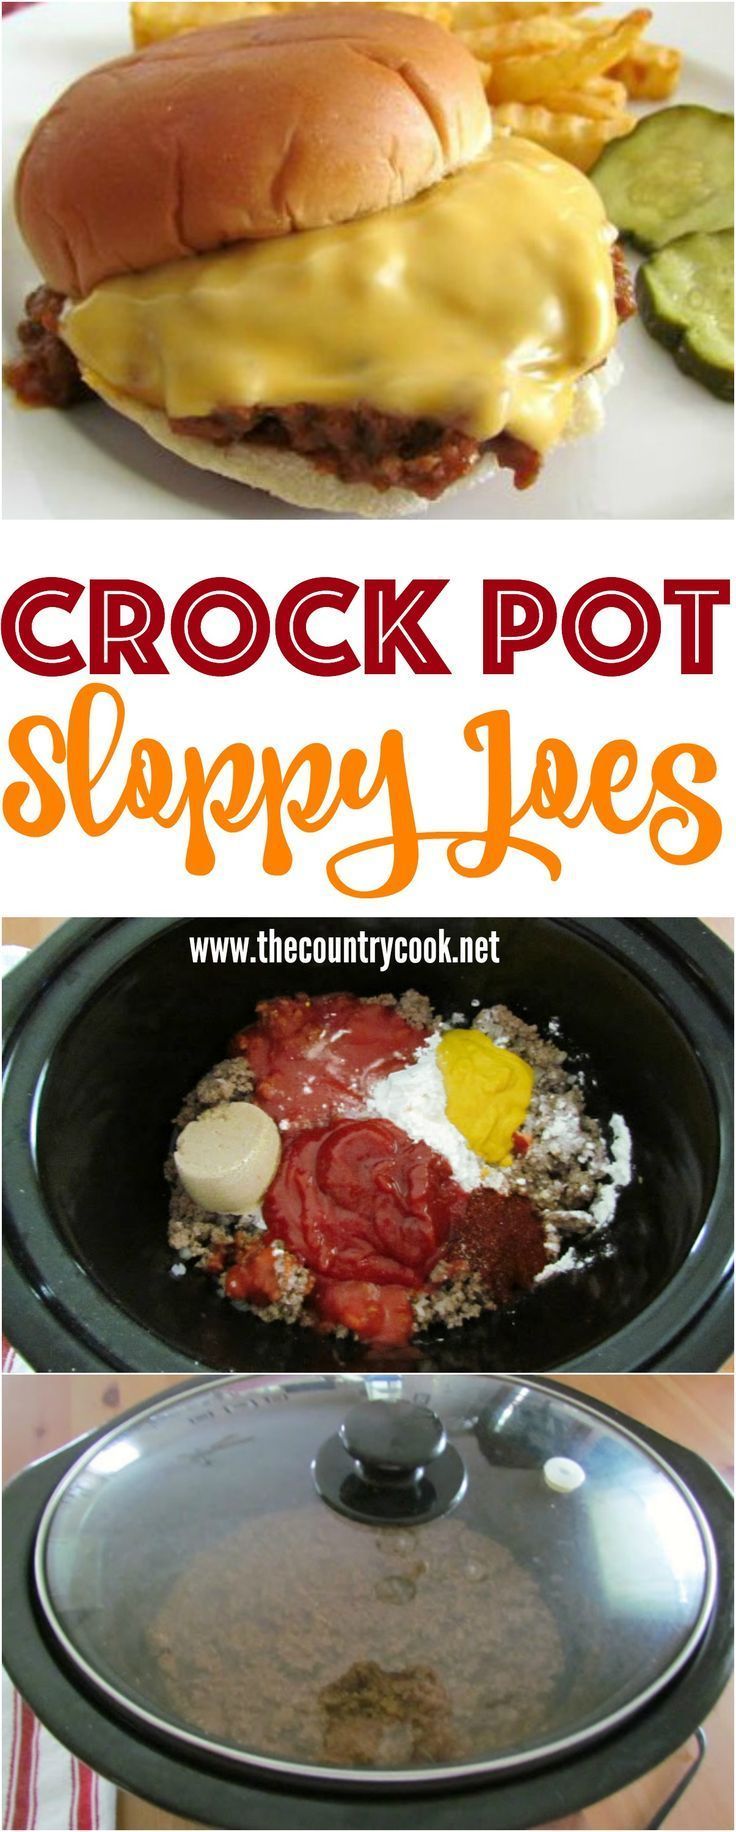 Homemade Crock Pot Sloppy Joe recipe from The Country Cook